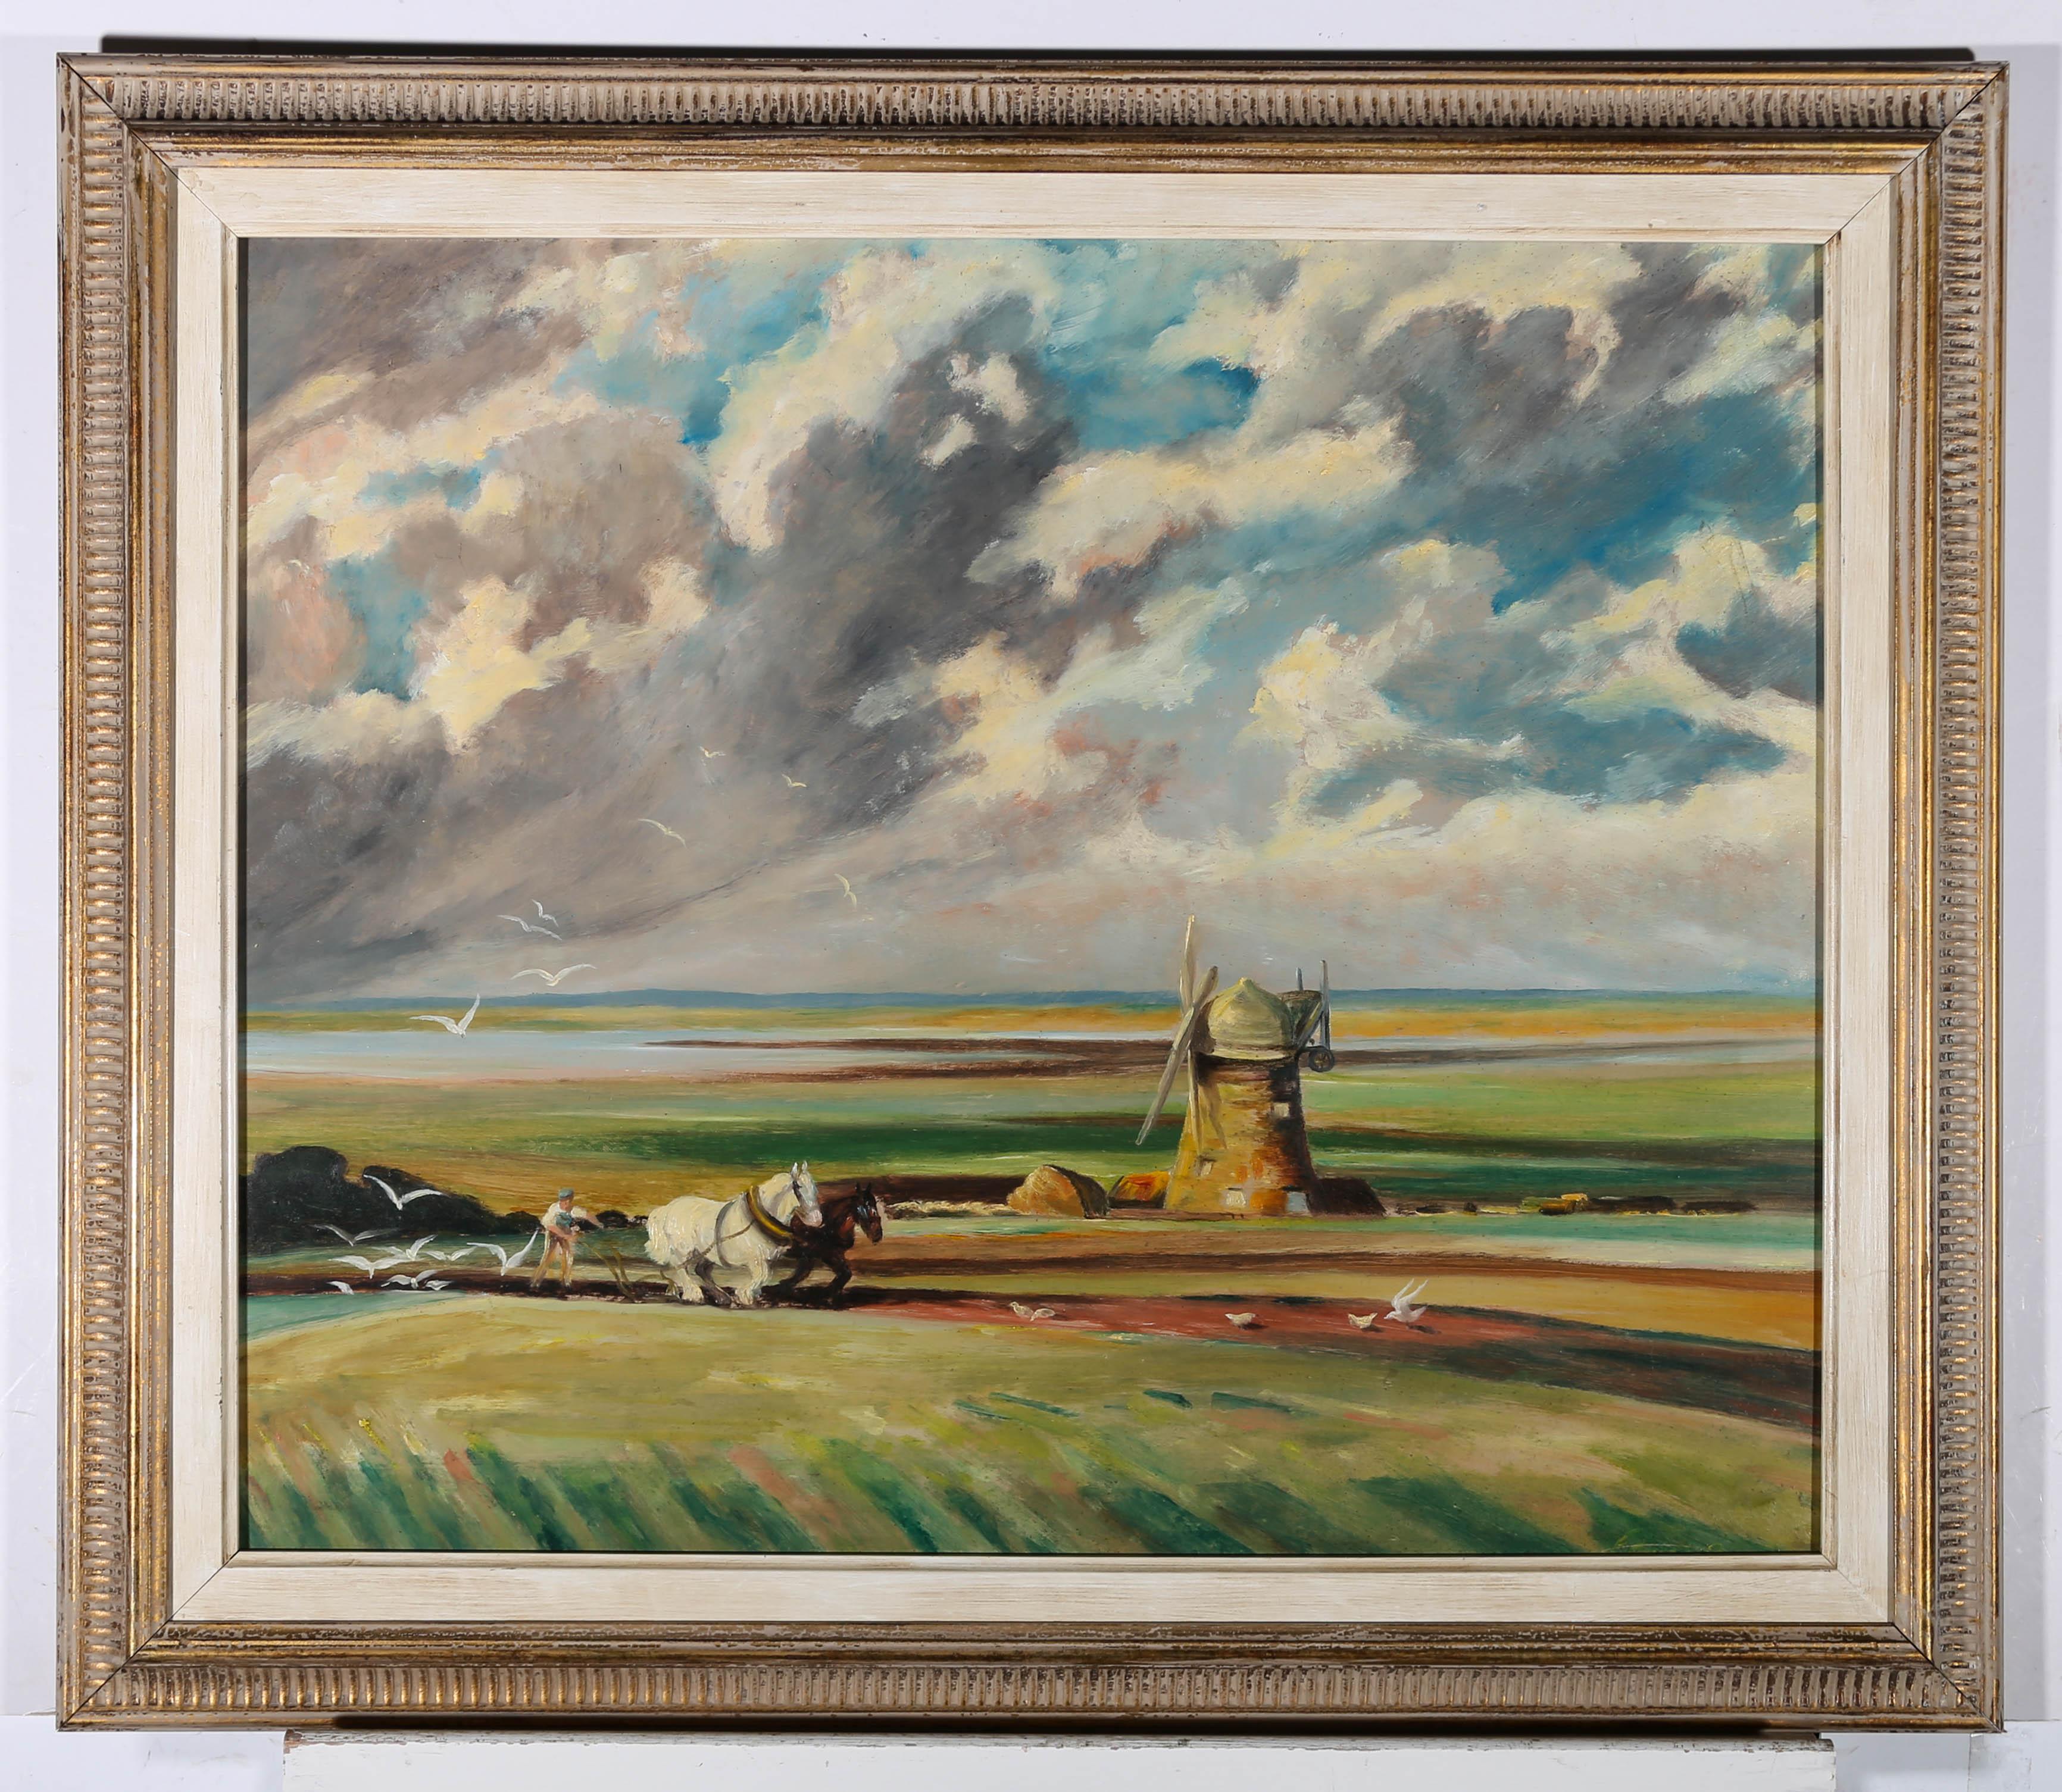 Unknown Landscape Painting - 20th Century Oil - Working the Fields